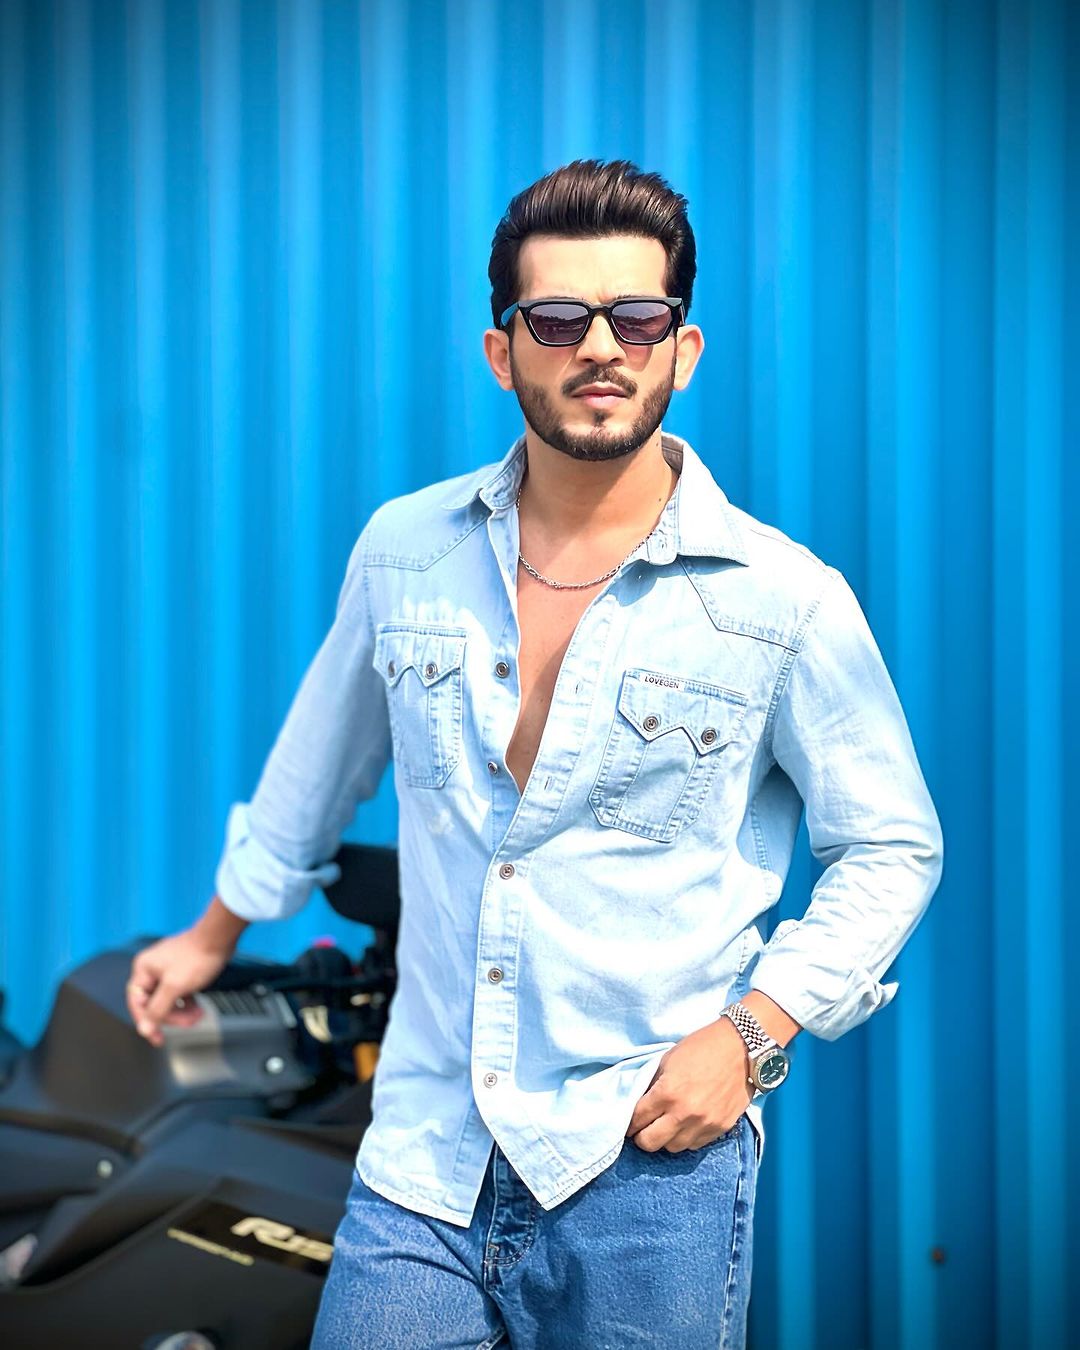 Interesting News About Arjun Bijlani Who was Famous For His Roles in Mein Har Mera Dil, Naagin Shared Exclusive Updates